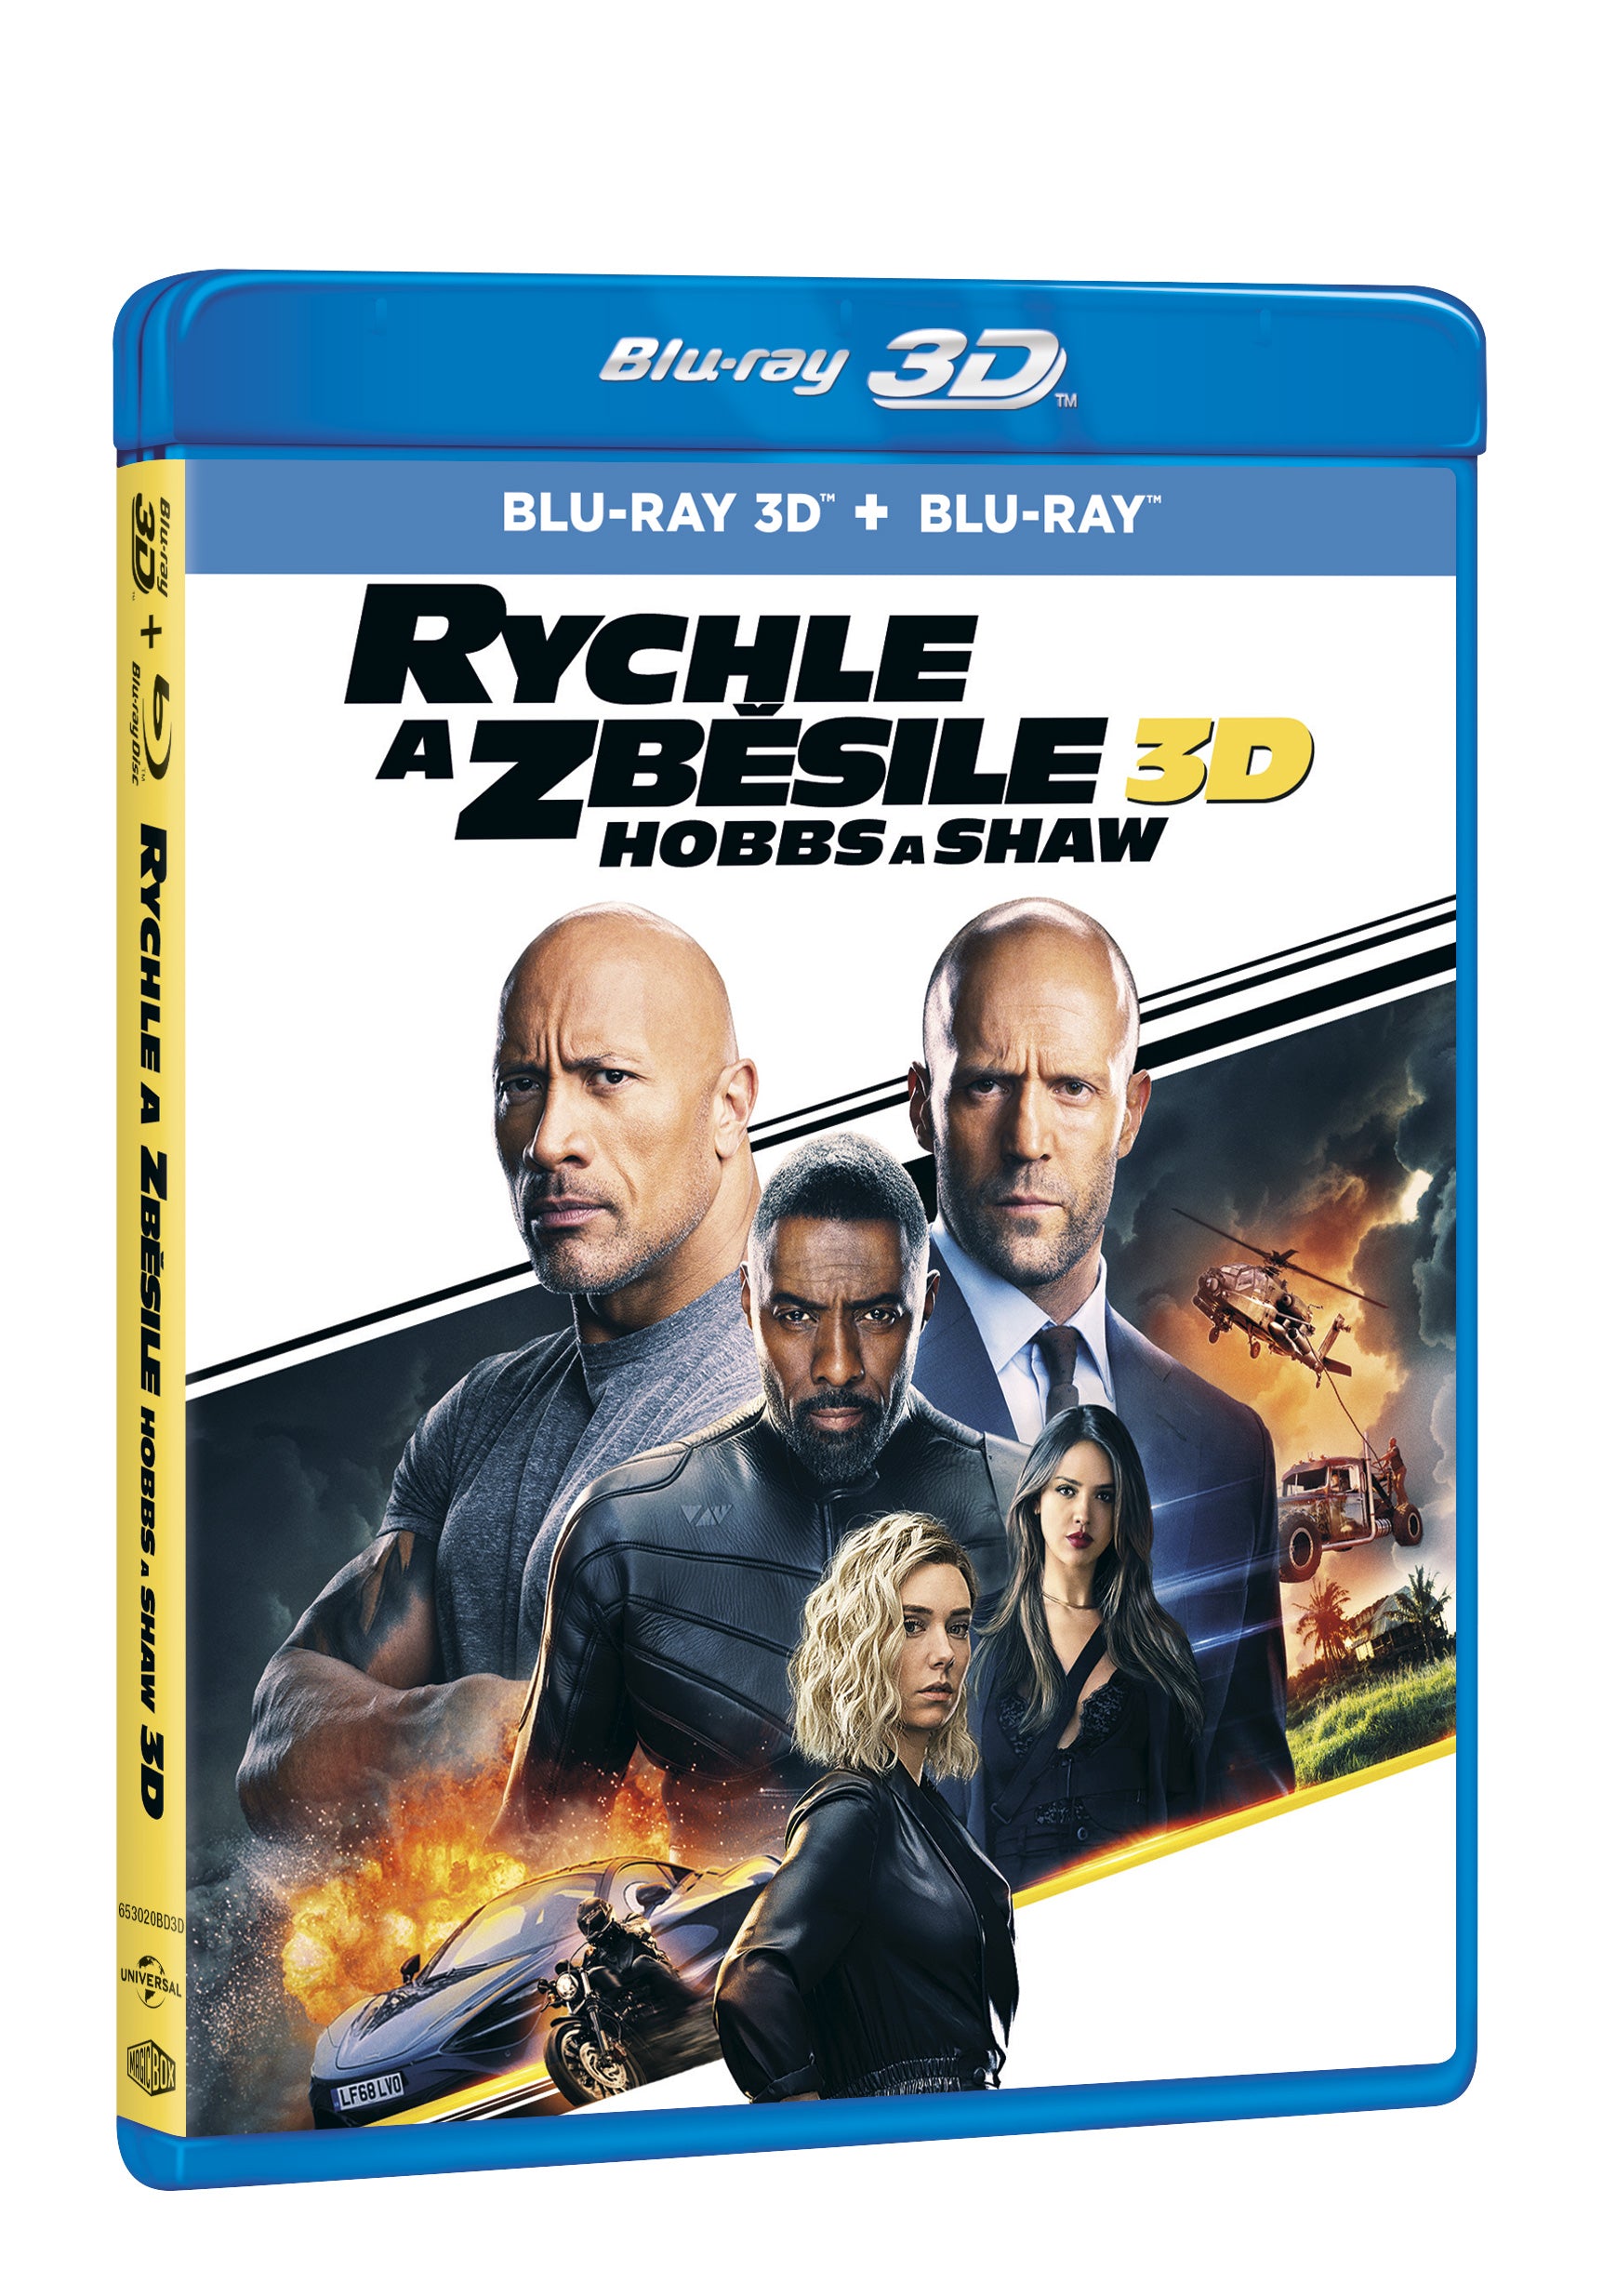 Rychle a zbesile: Hobbs a Shaw 2BD (3D+2D) / Fast & Furious Presents: Hobbs & Shaw - Czech version